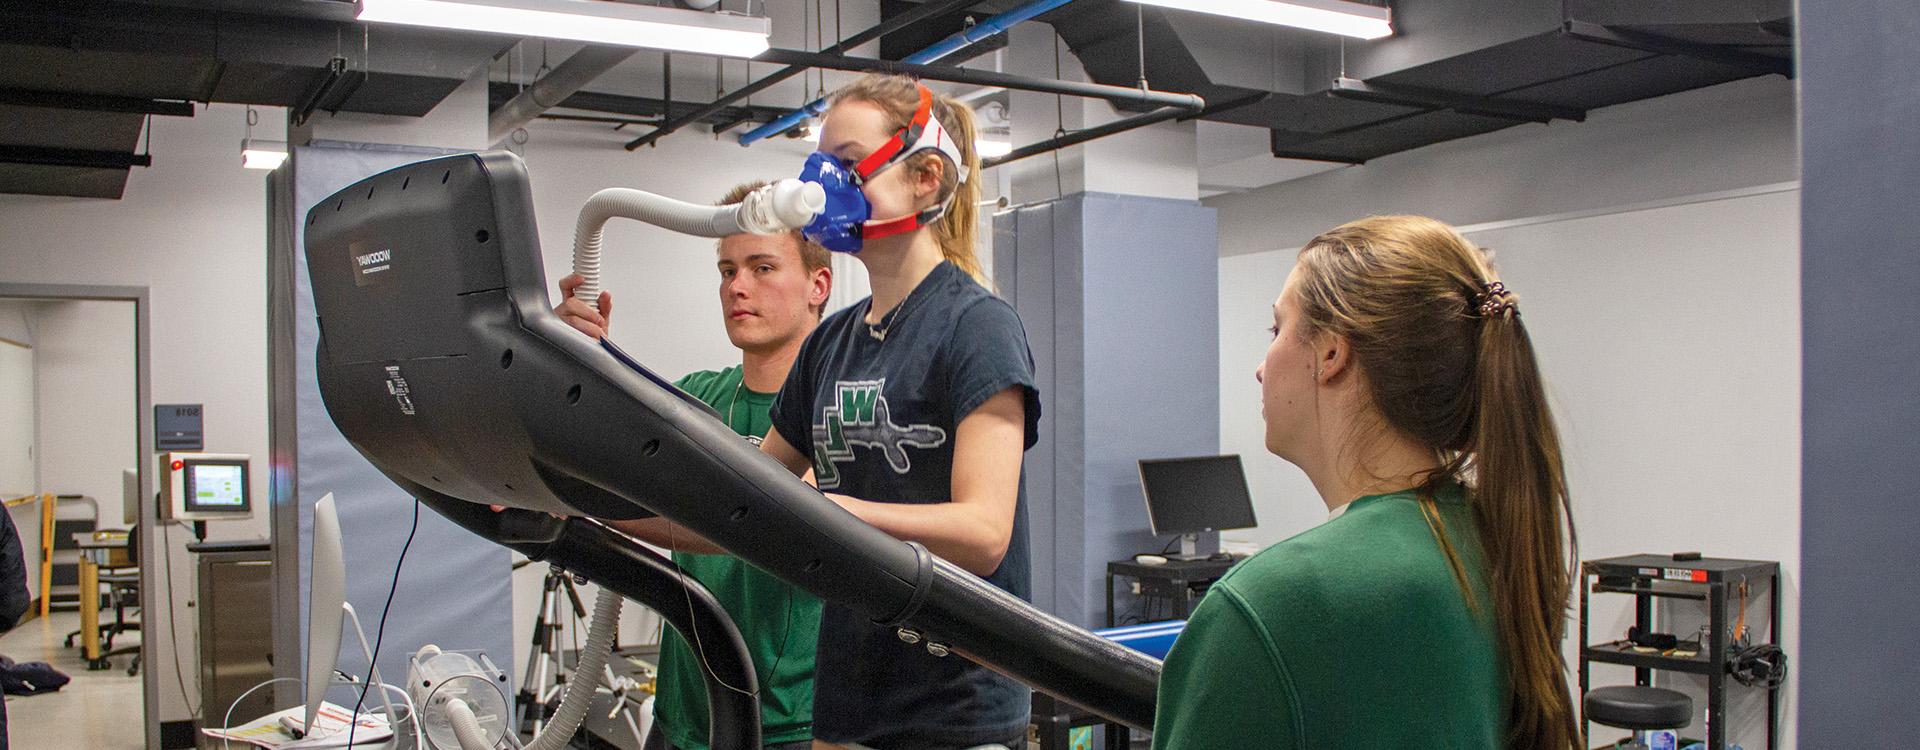 WLC students in sport and exercise science lab